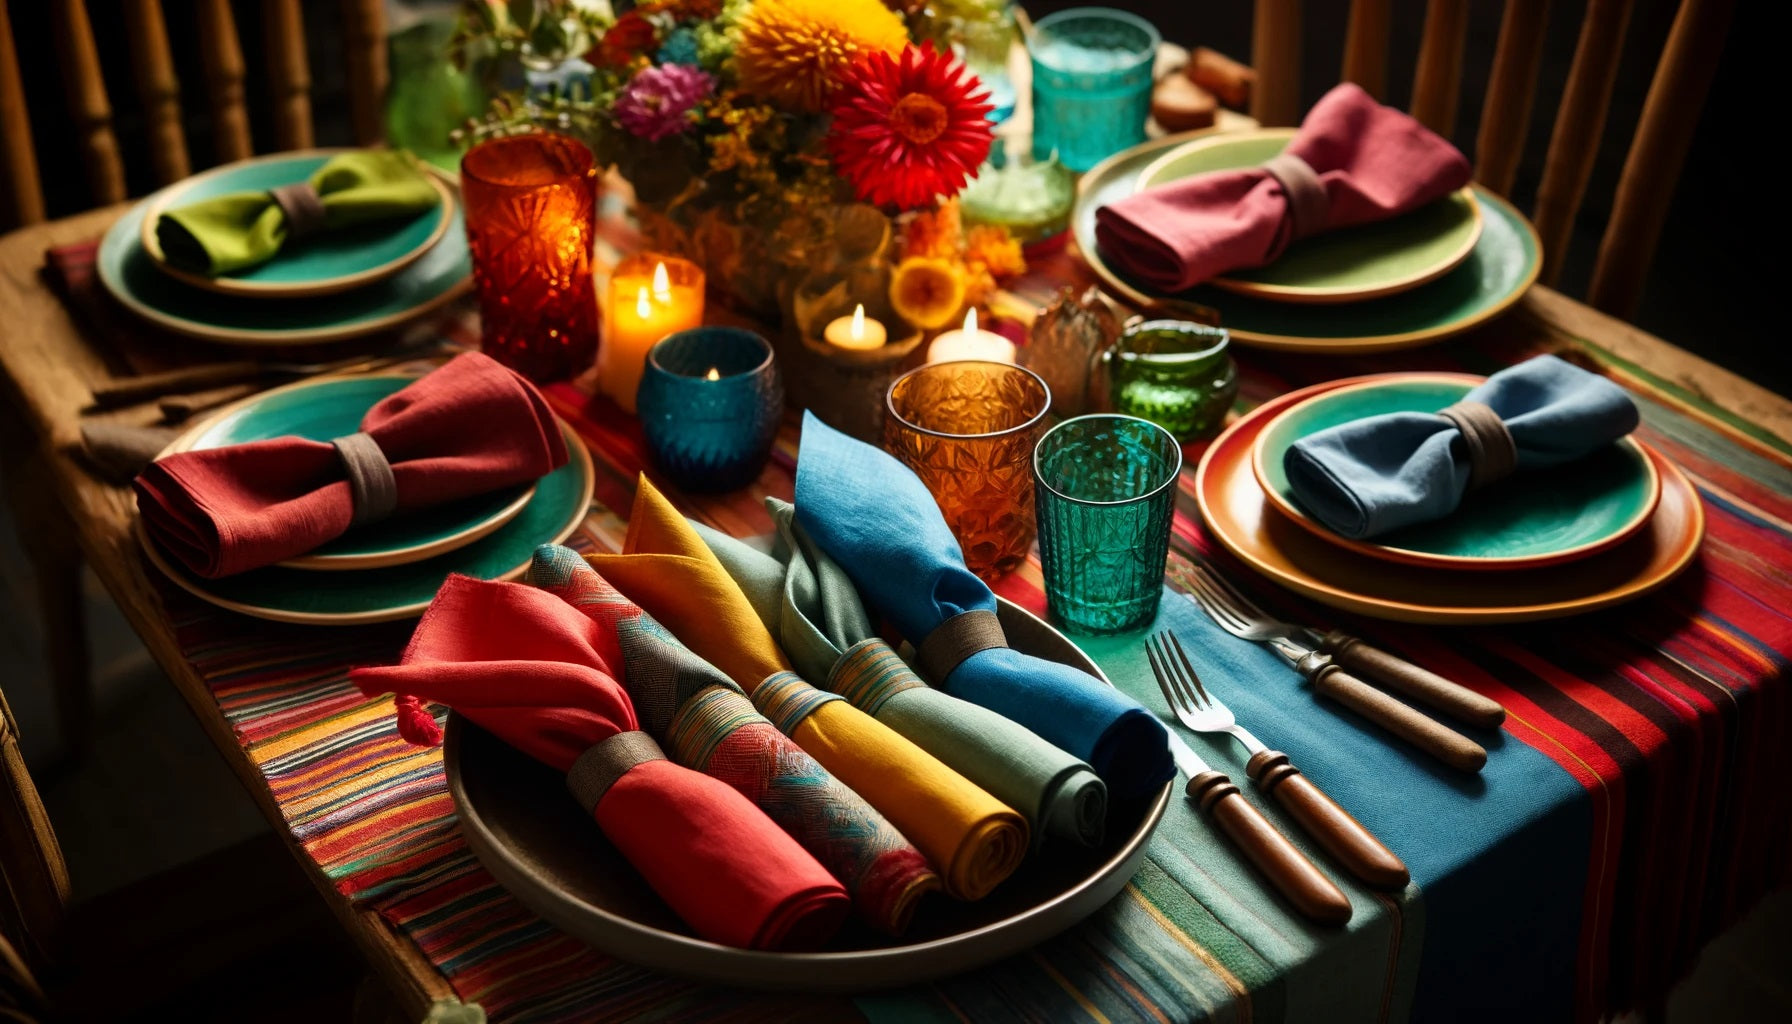 The napkins are placed next to matching dinnerware, with decorative elements like colorful glassware, candles, and a bright floral centerpiece. The scene is lit with warm, inviting lighting, emphasizing the rich hues and textures of the linen napkins.